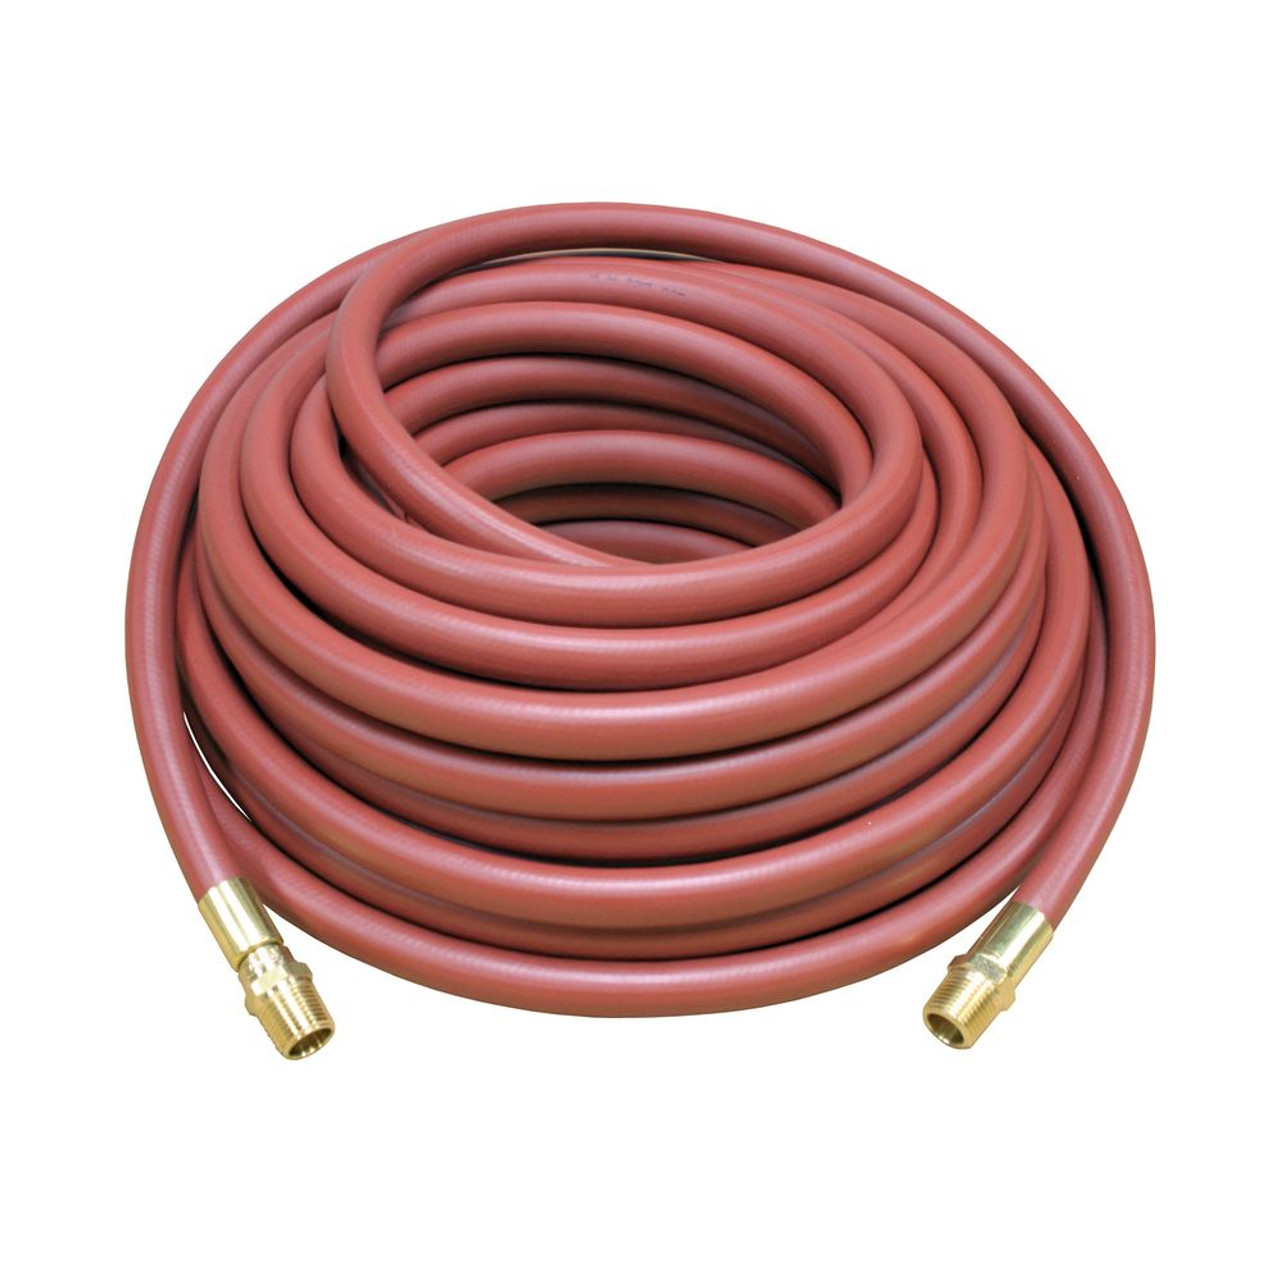 Reelcraft S601026-200 3/4 x 200 ft 250psi Replacement Hose Assembly for  Air/Water